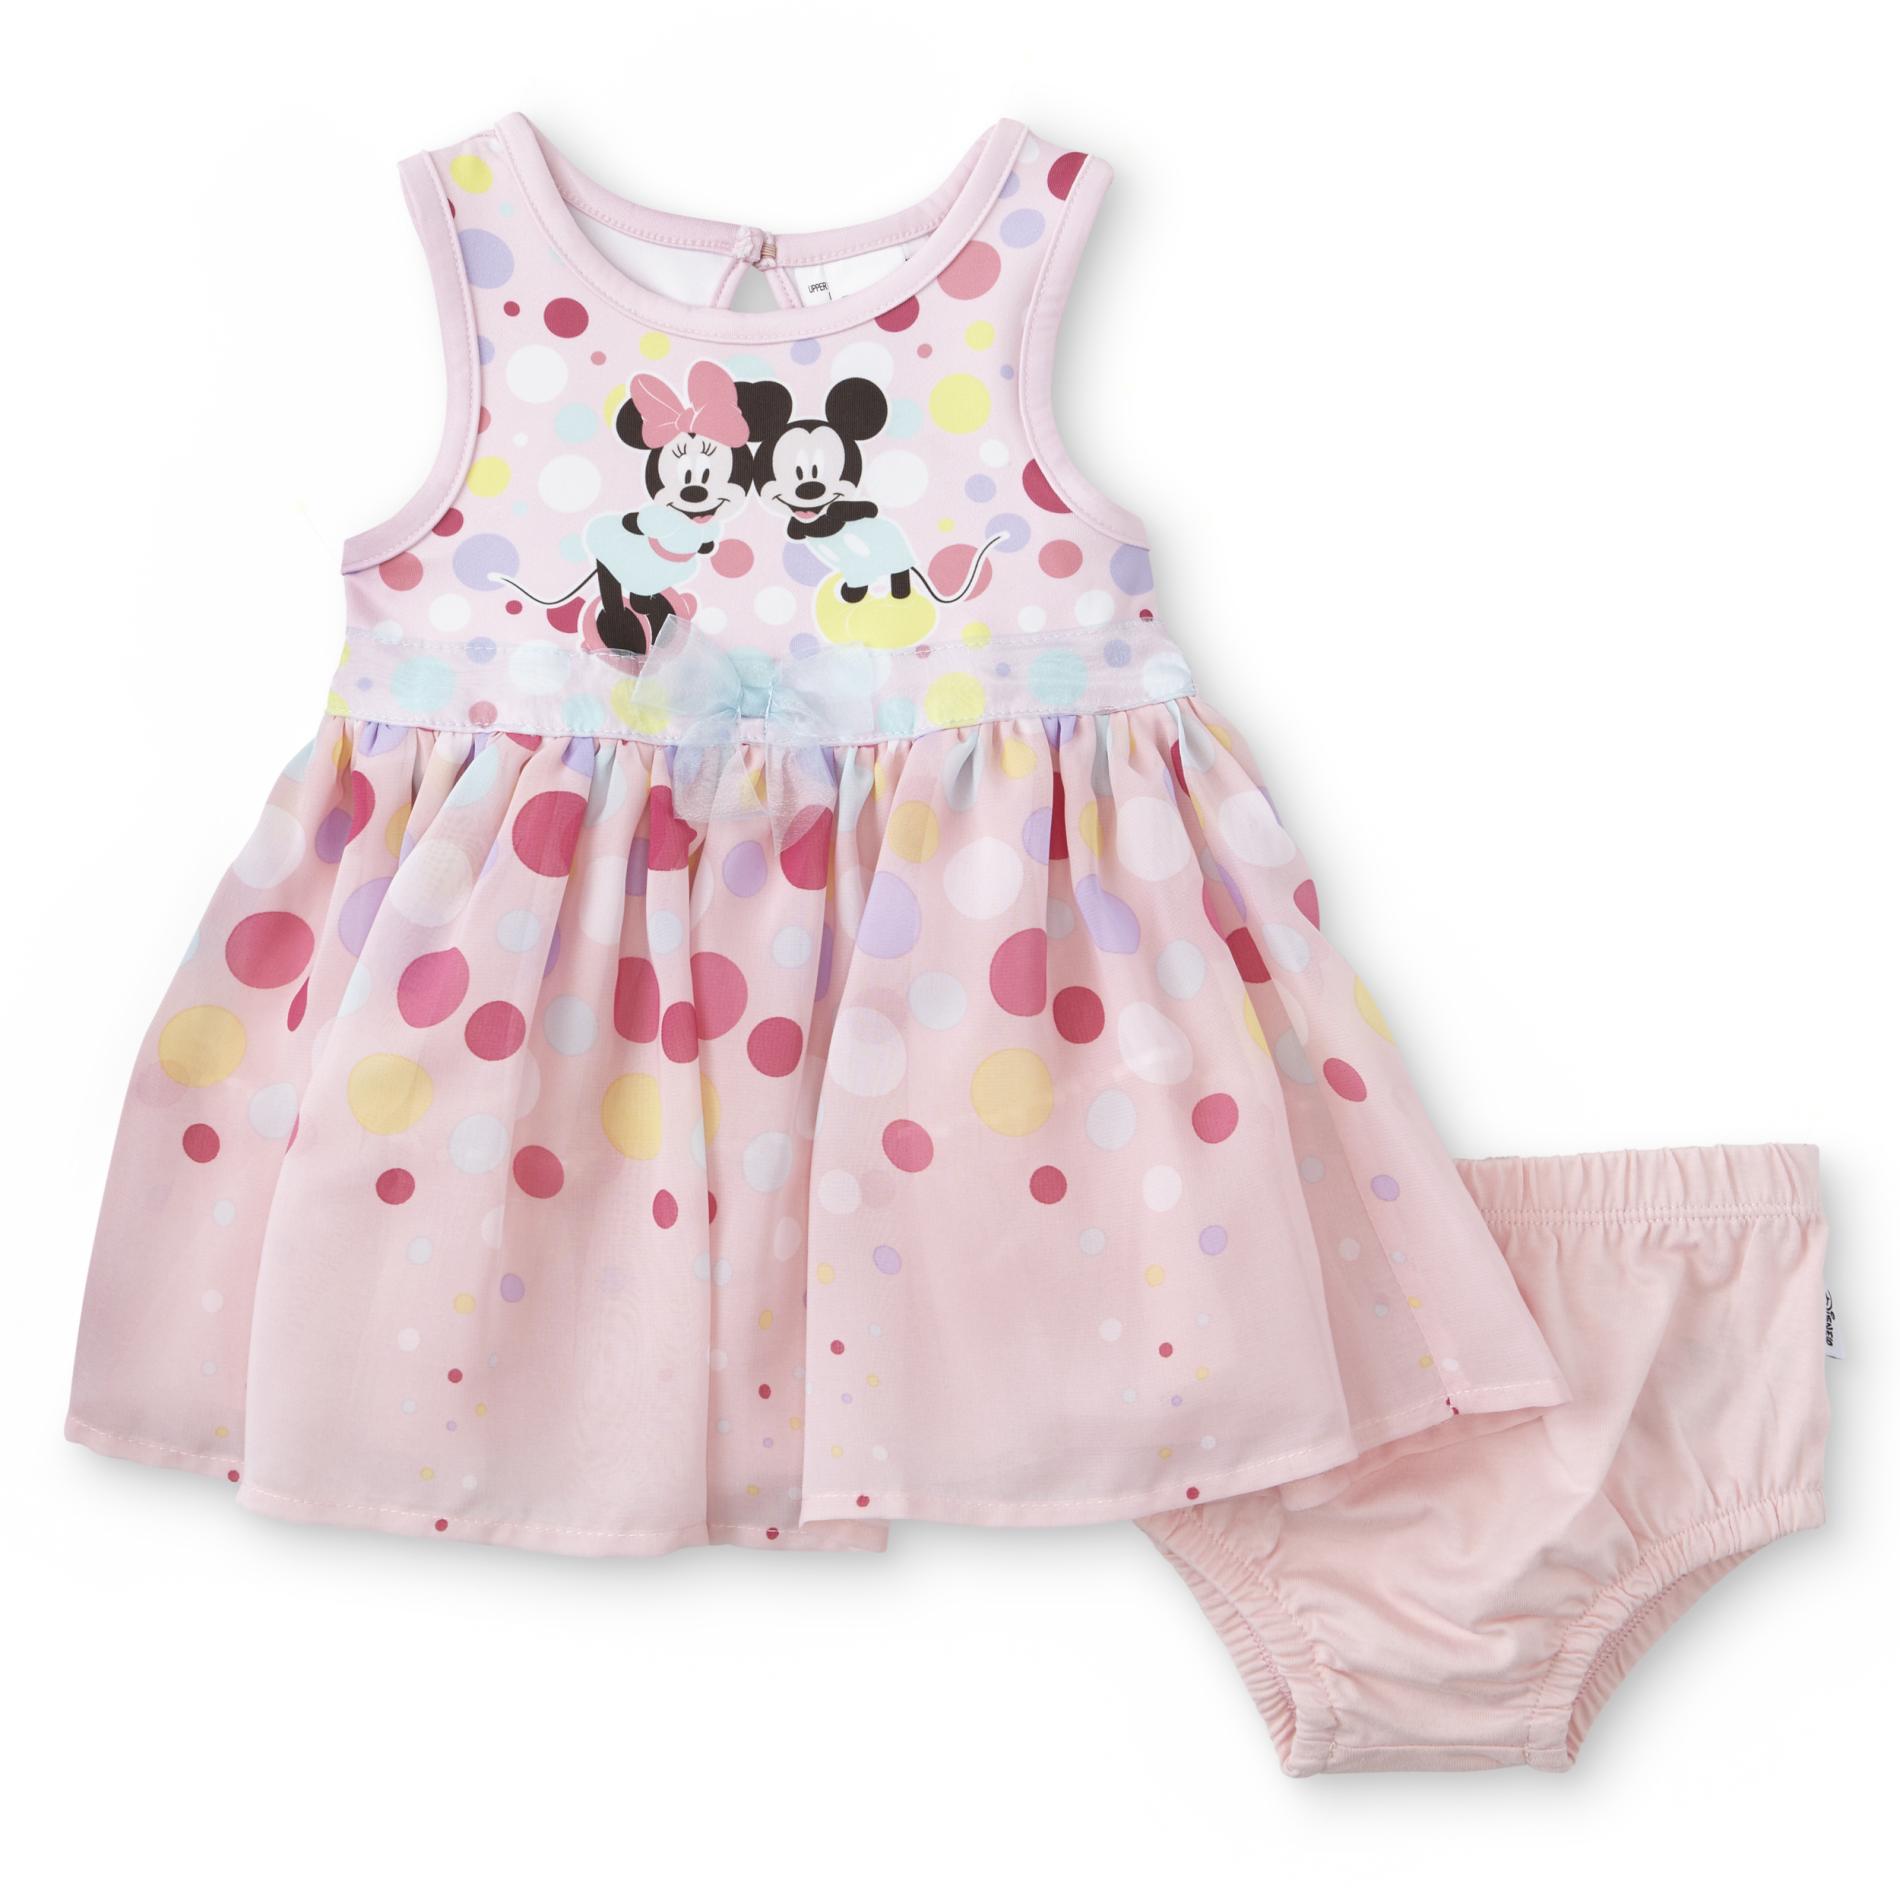 Disney Minnie Mouse Infant Girls' Dress & Diaper Cover